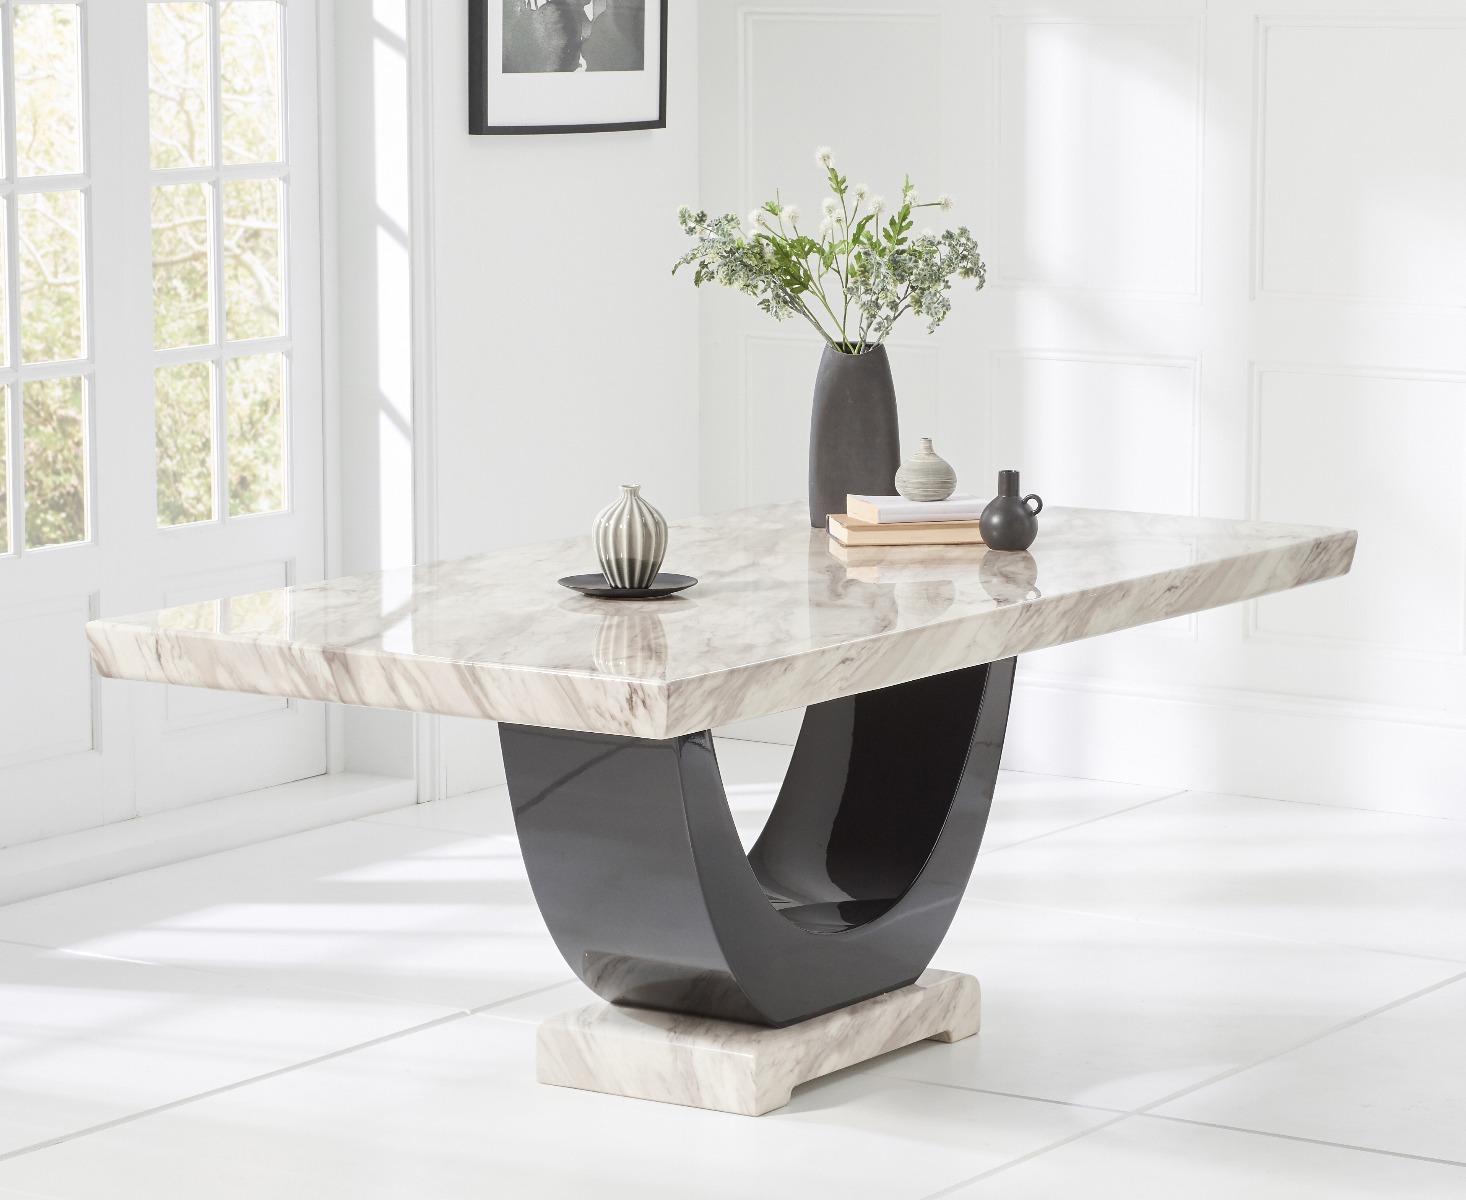 Photo 2 of Raphael 170cm cream and black pedestal marble dining table with 4 grey sophia chairs